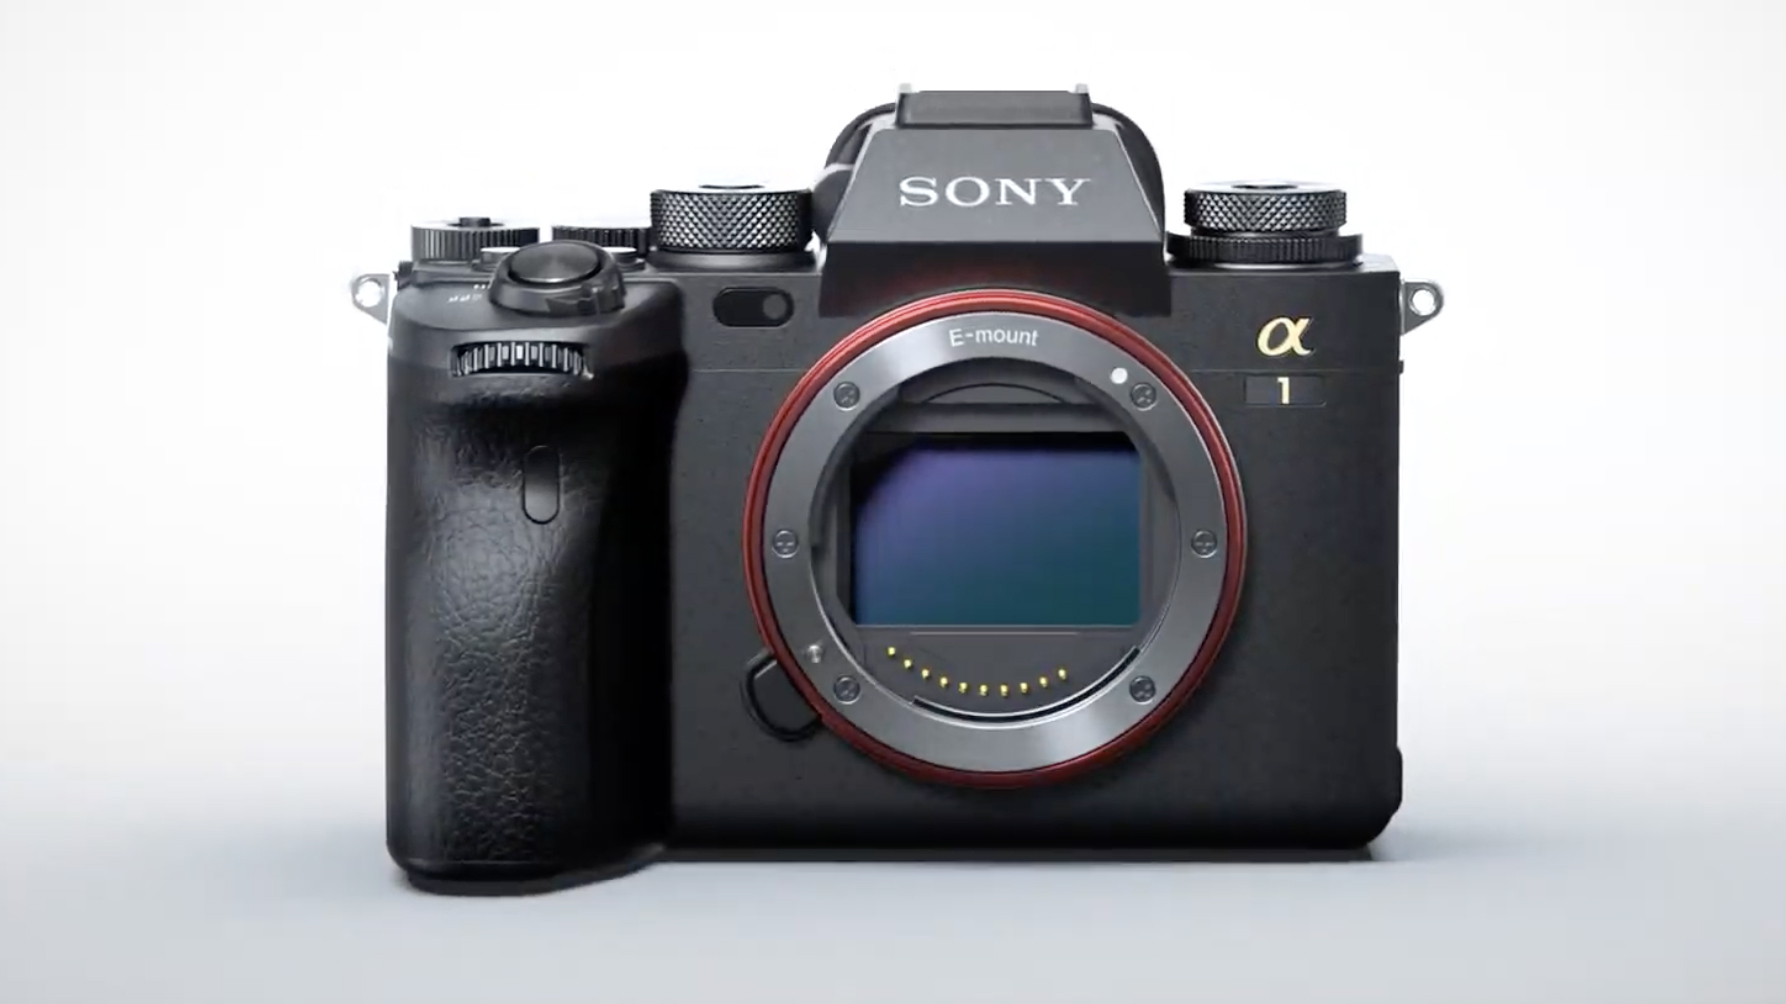 Latest Sony firmware update adds authentication tools and new features